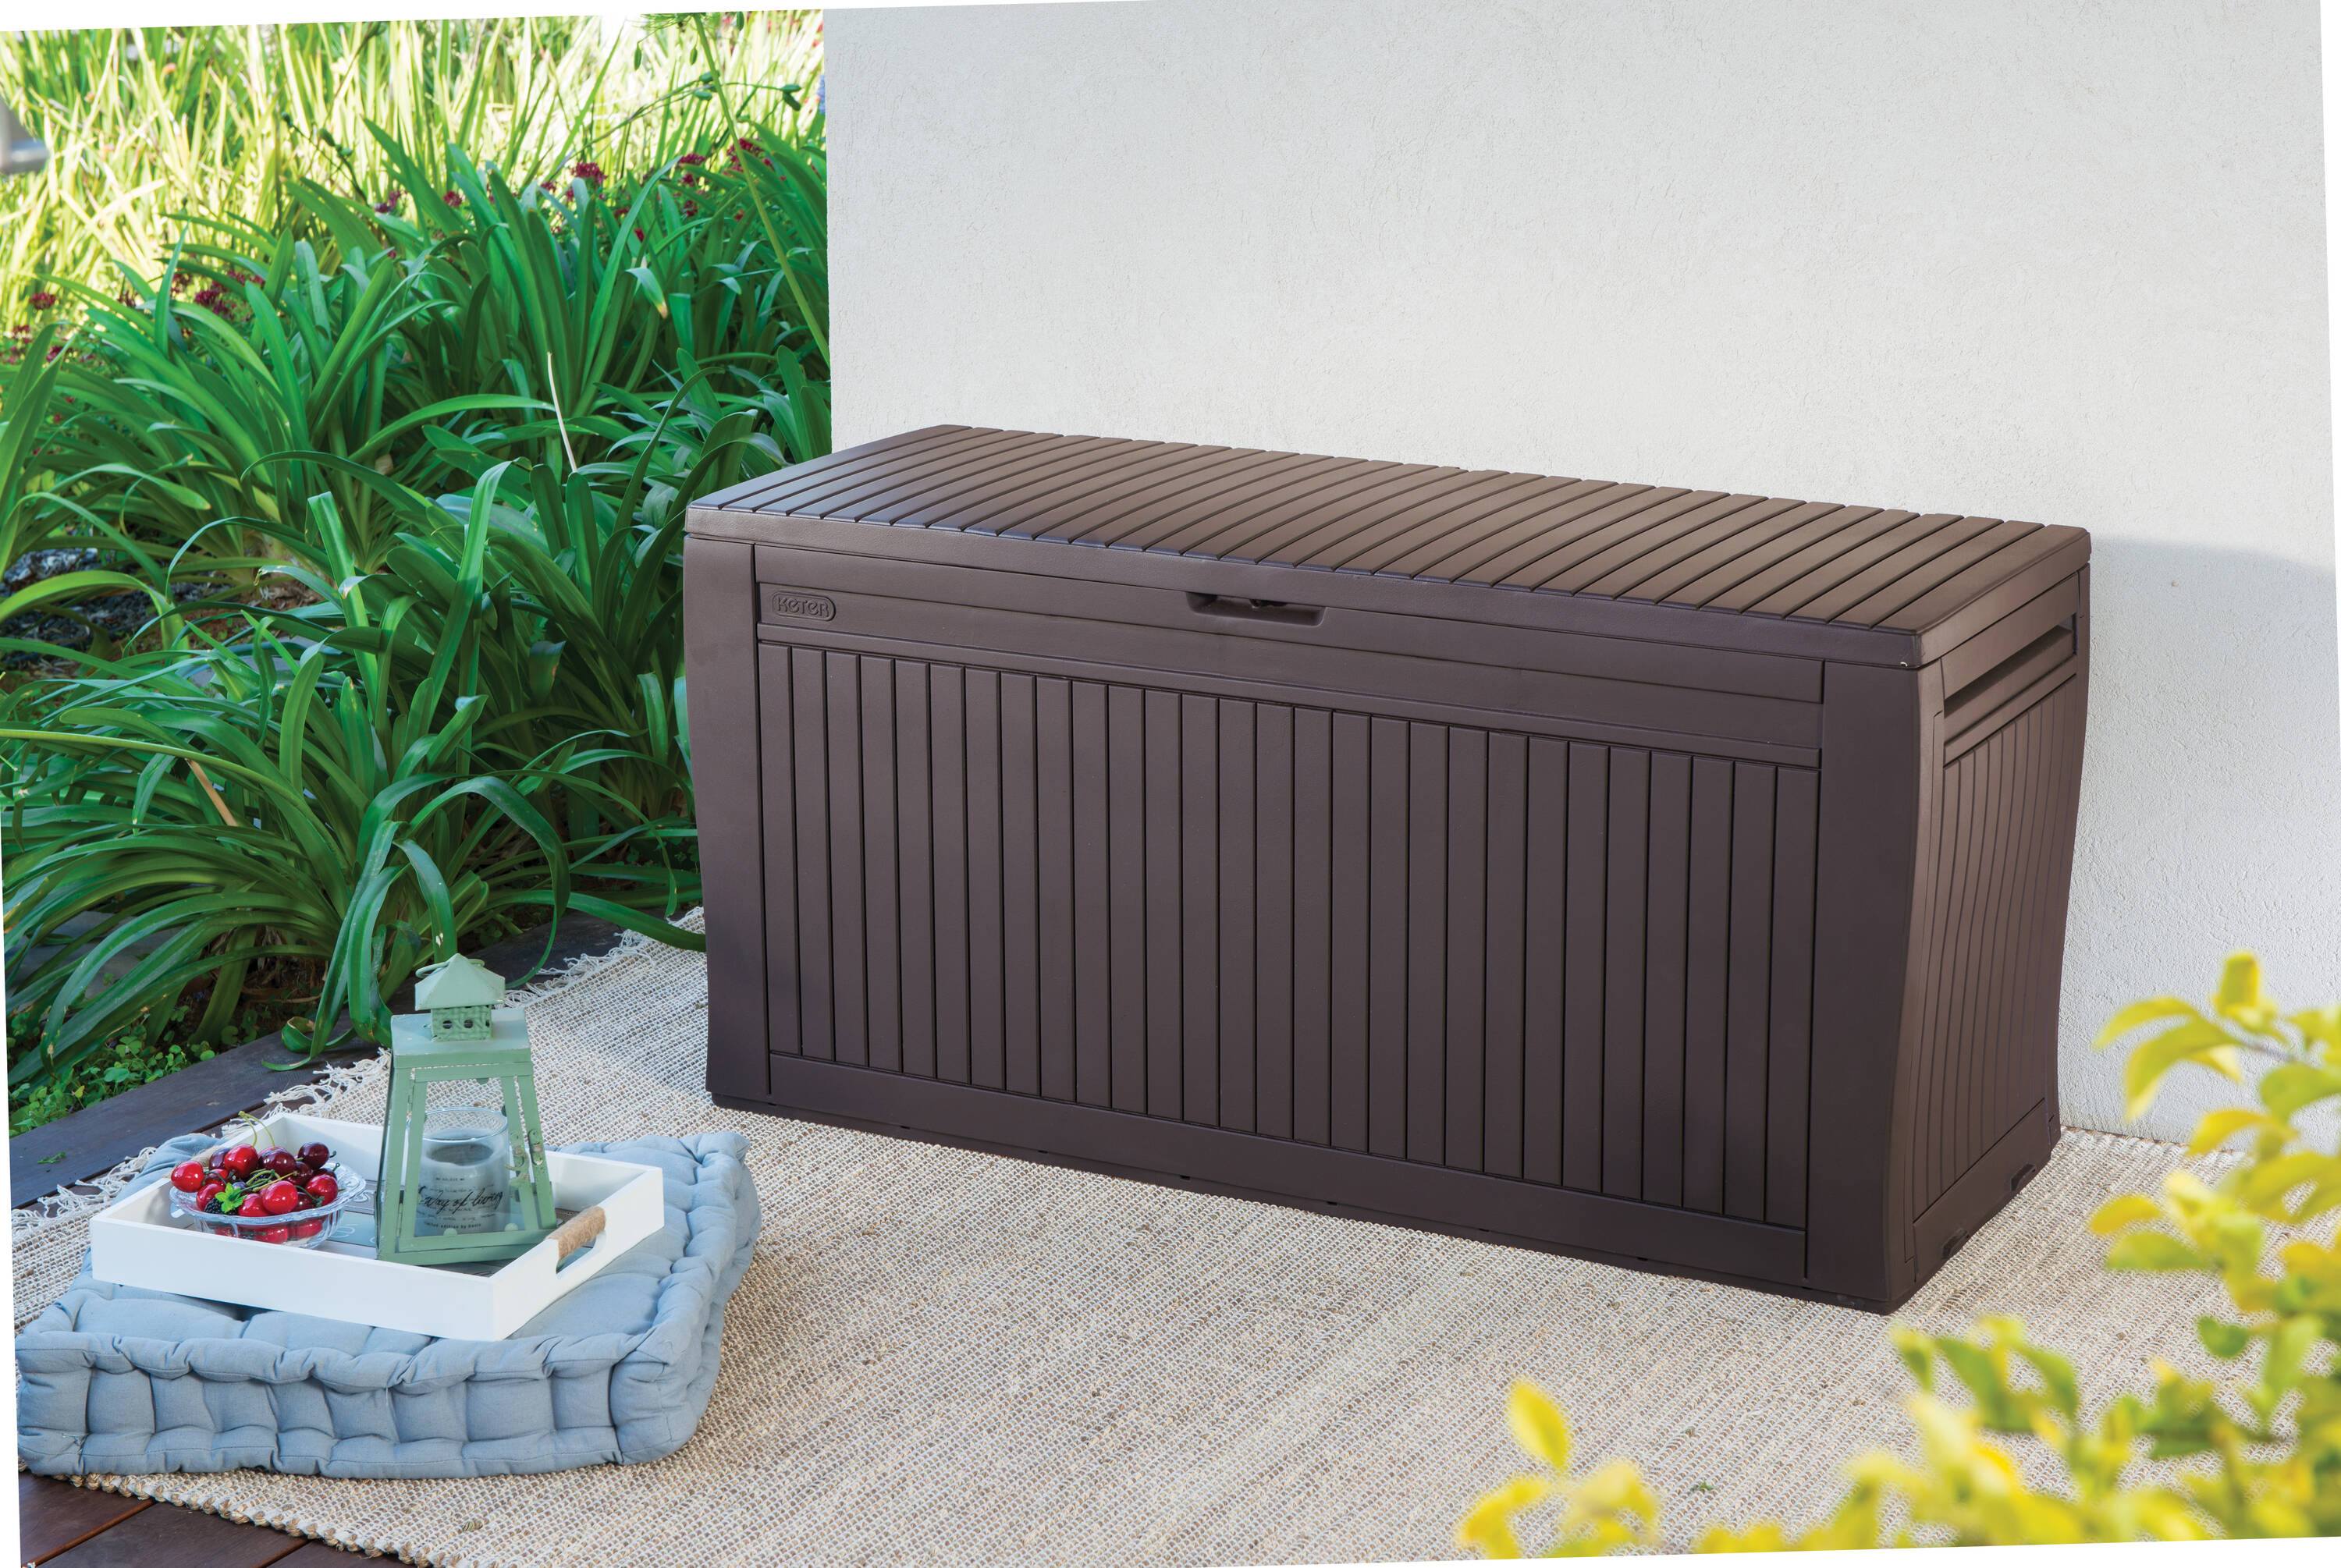 Keter Comfy Outdoor Storage 46-in L x 17.6-in 71-Gallons Brown Durable  Plastic Deck Box in the Deck Boxes department at